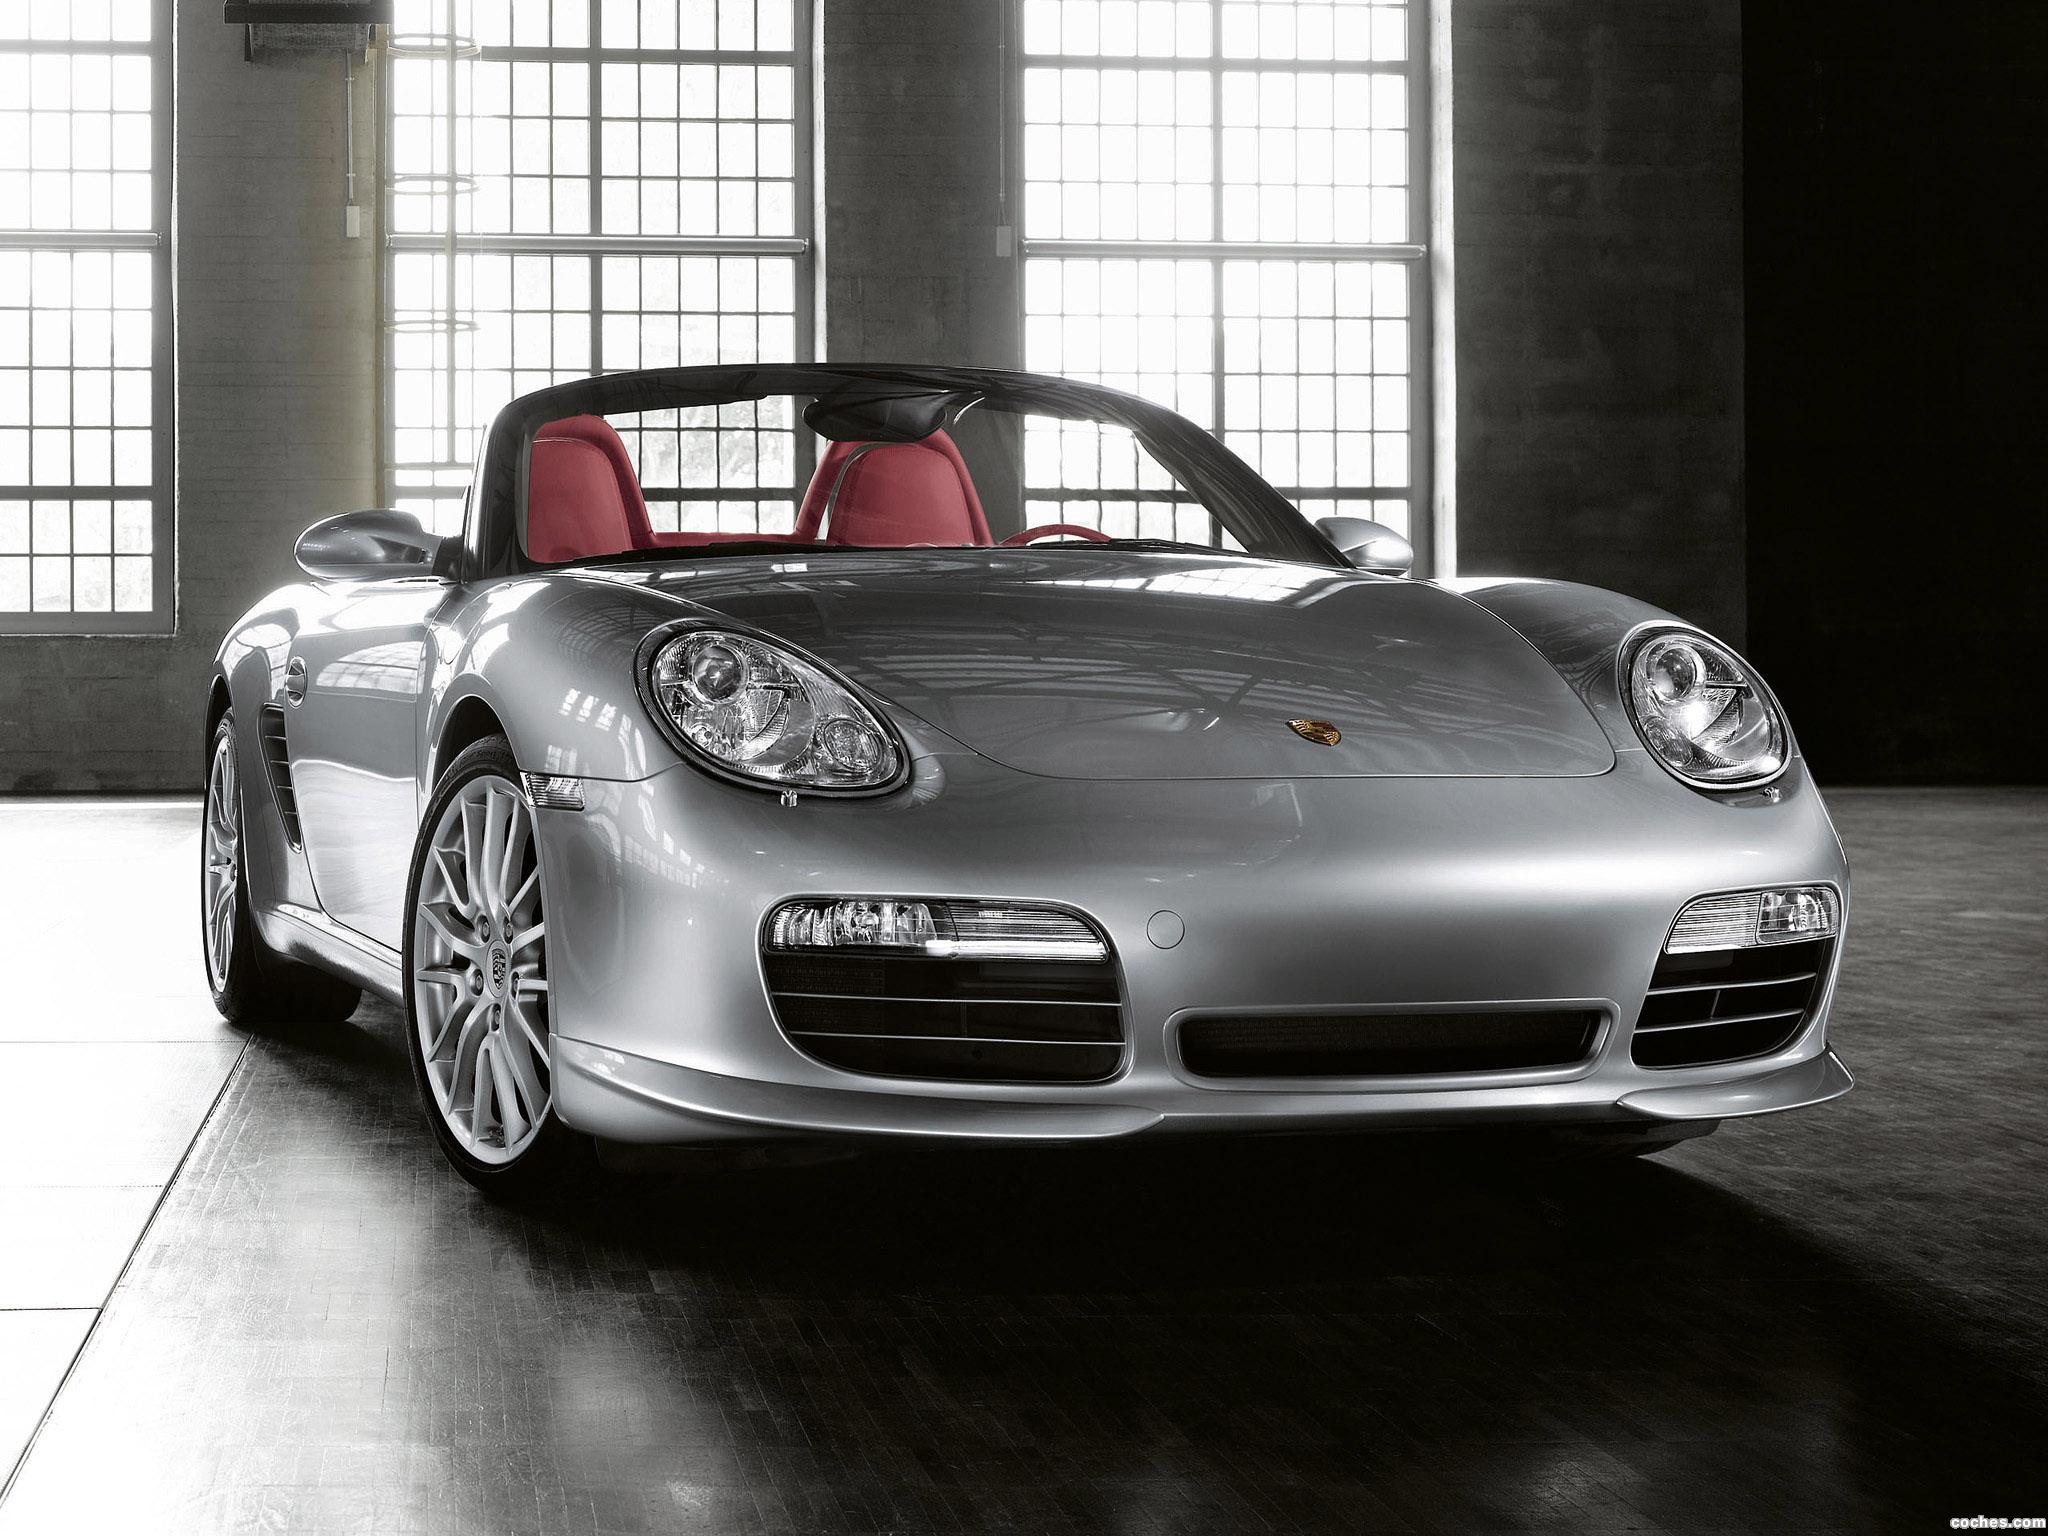 porsche_boxster-s-rs-60-spyder-limited-edition-987-2008_r10